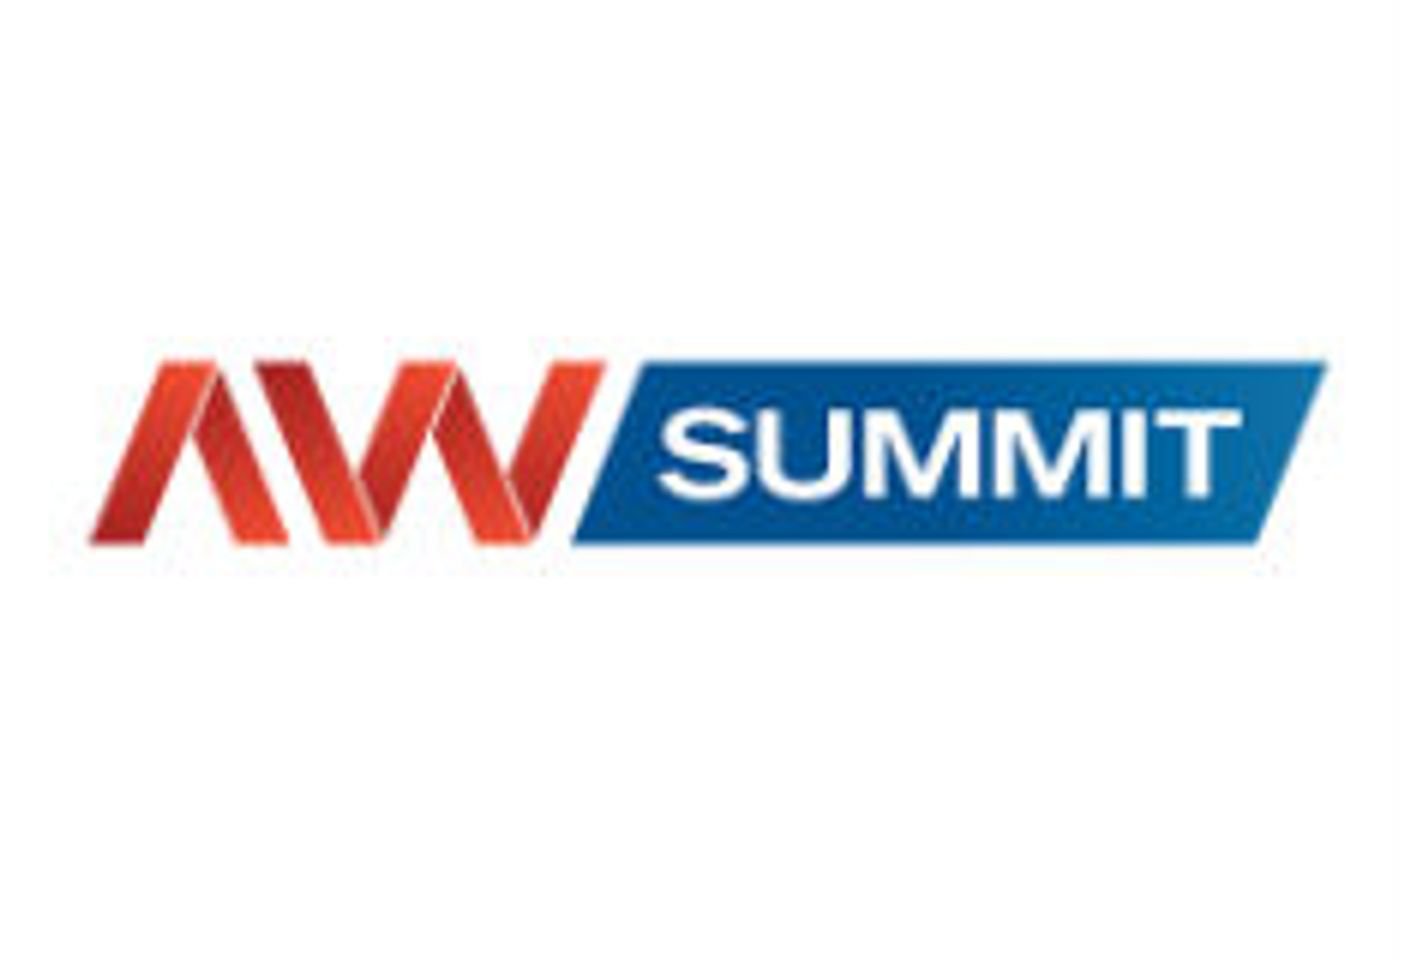 Adult Webcam Summit Slated For June 9-11 In Romania